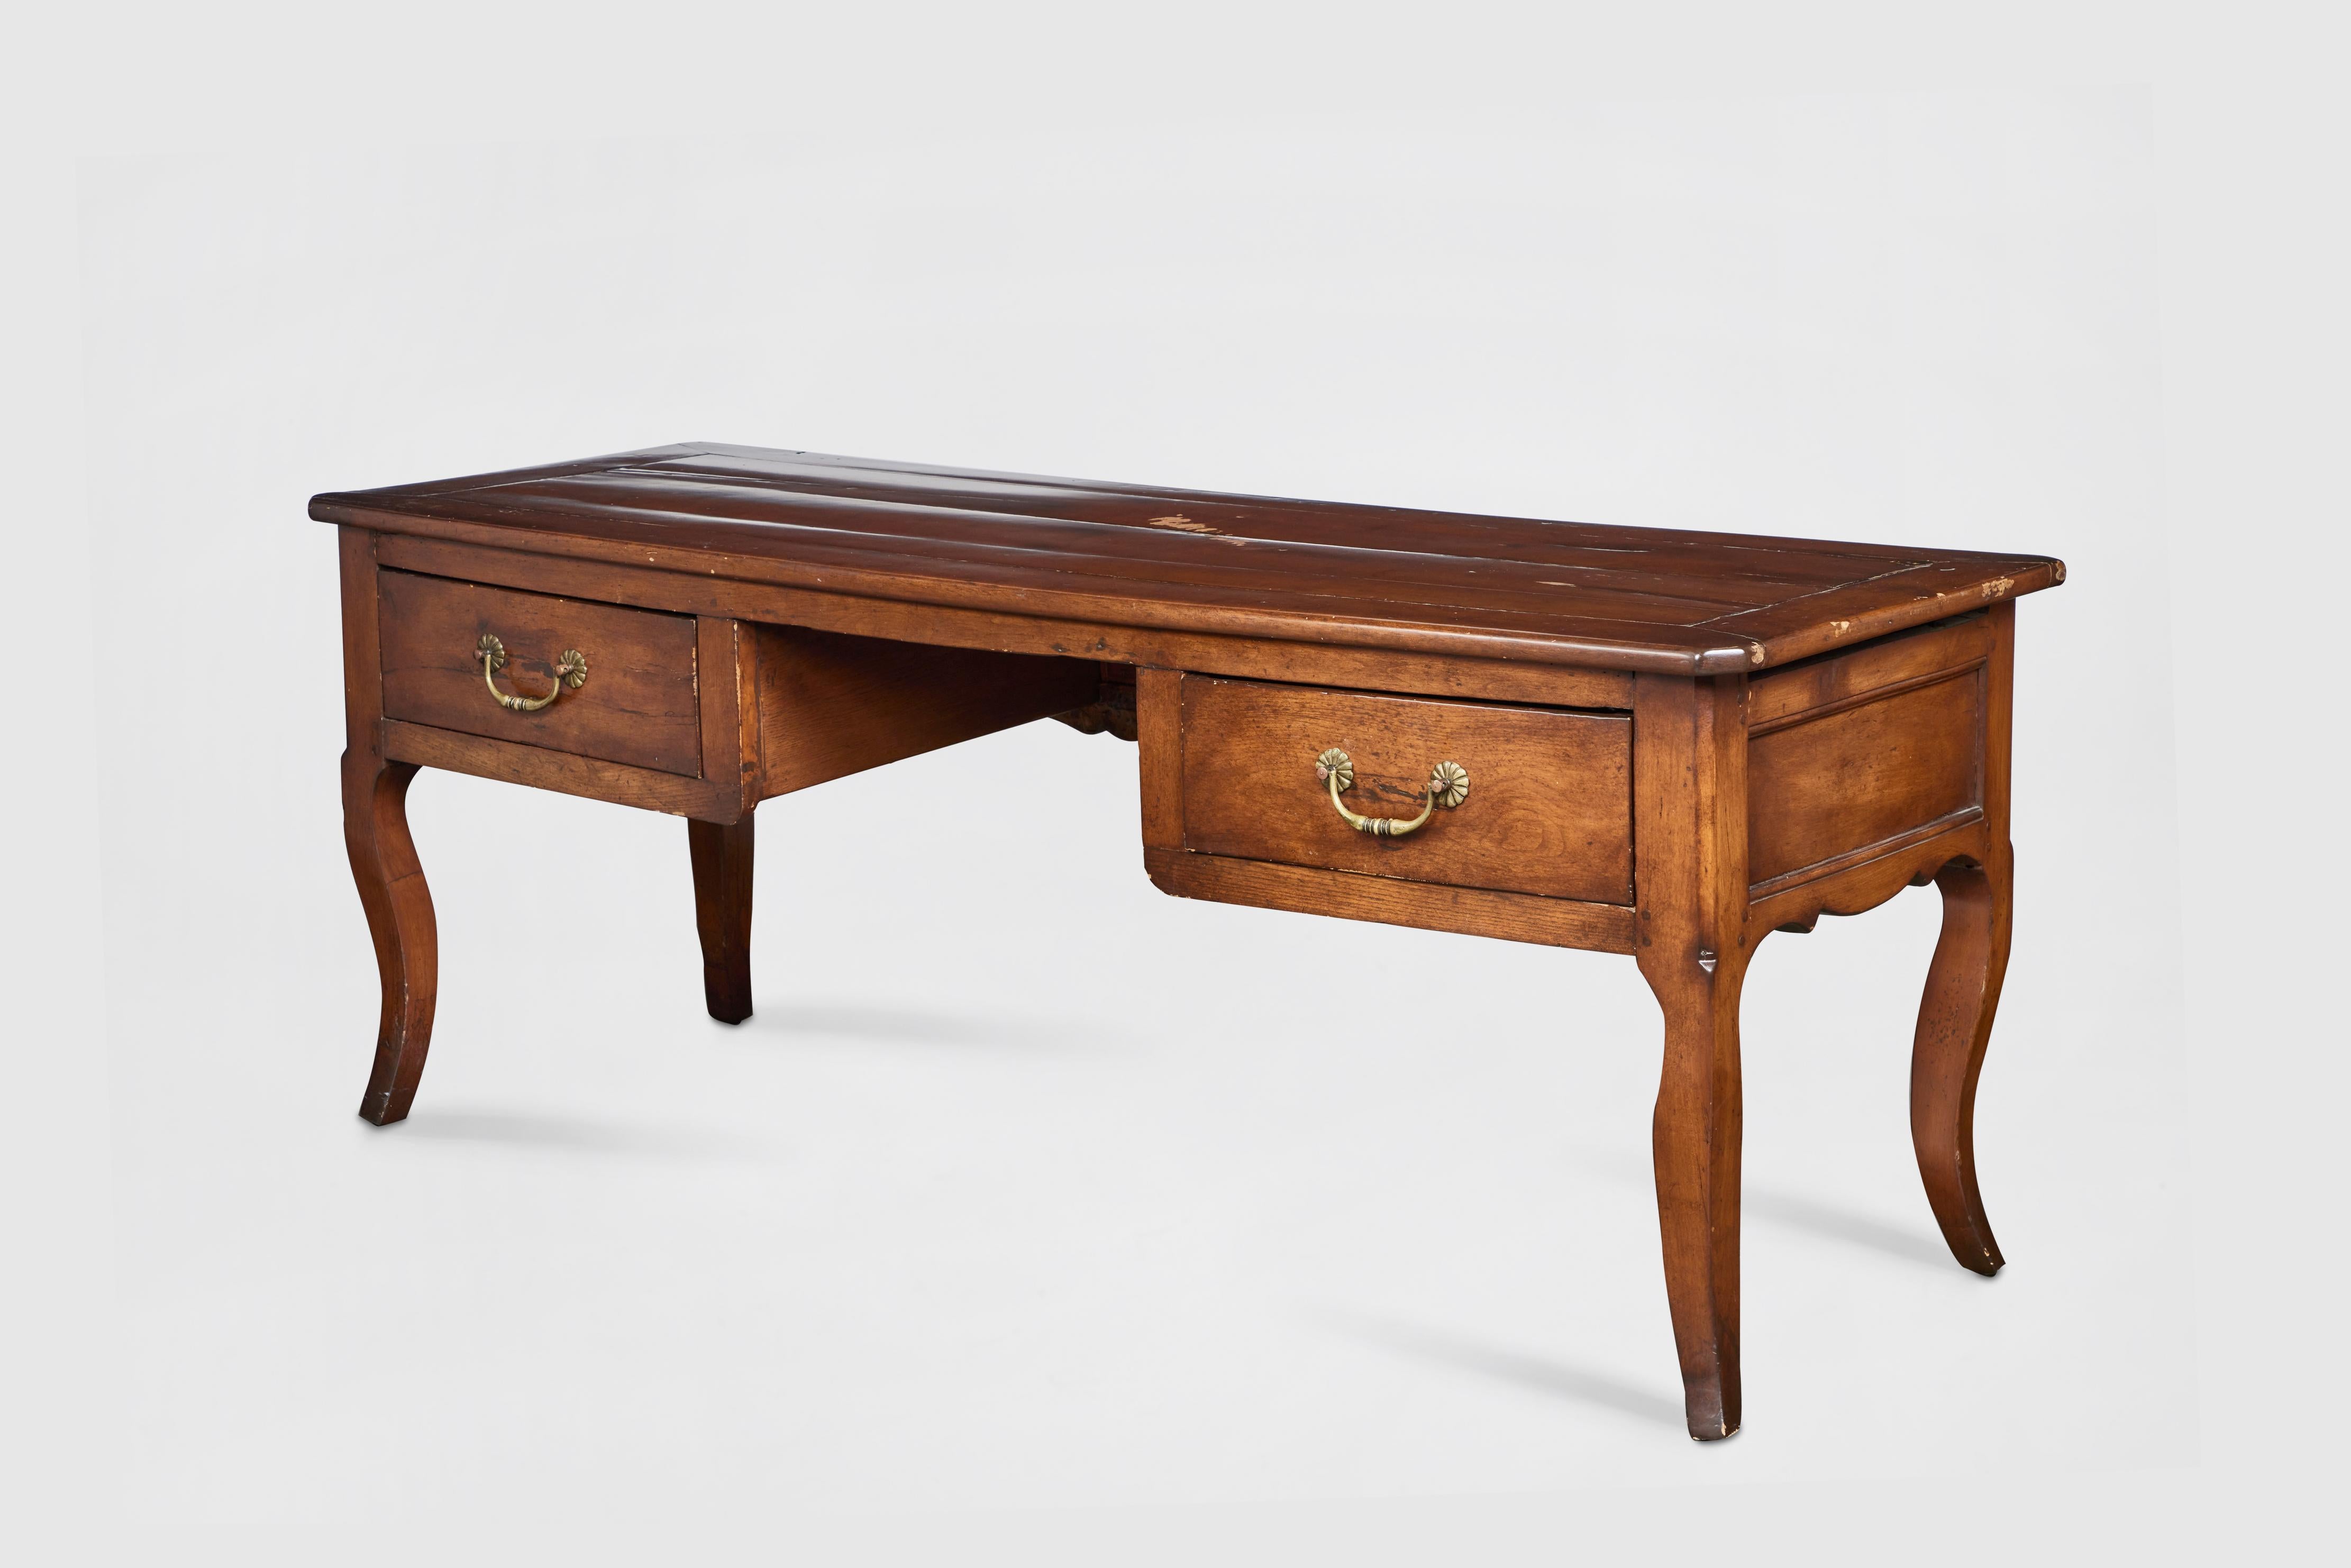 19th C. Antique Louis XV Style French oak desk with two drawers and original hardware. Its carved back and side aprons and sabre legs lend a regal standing to this piece. 

Additional Dimensions: 
Drawers 6